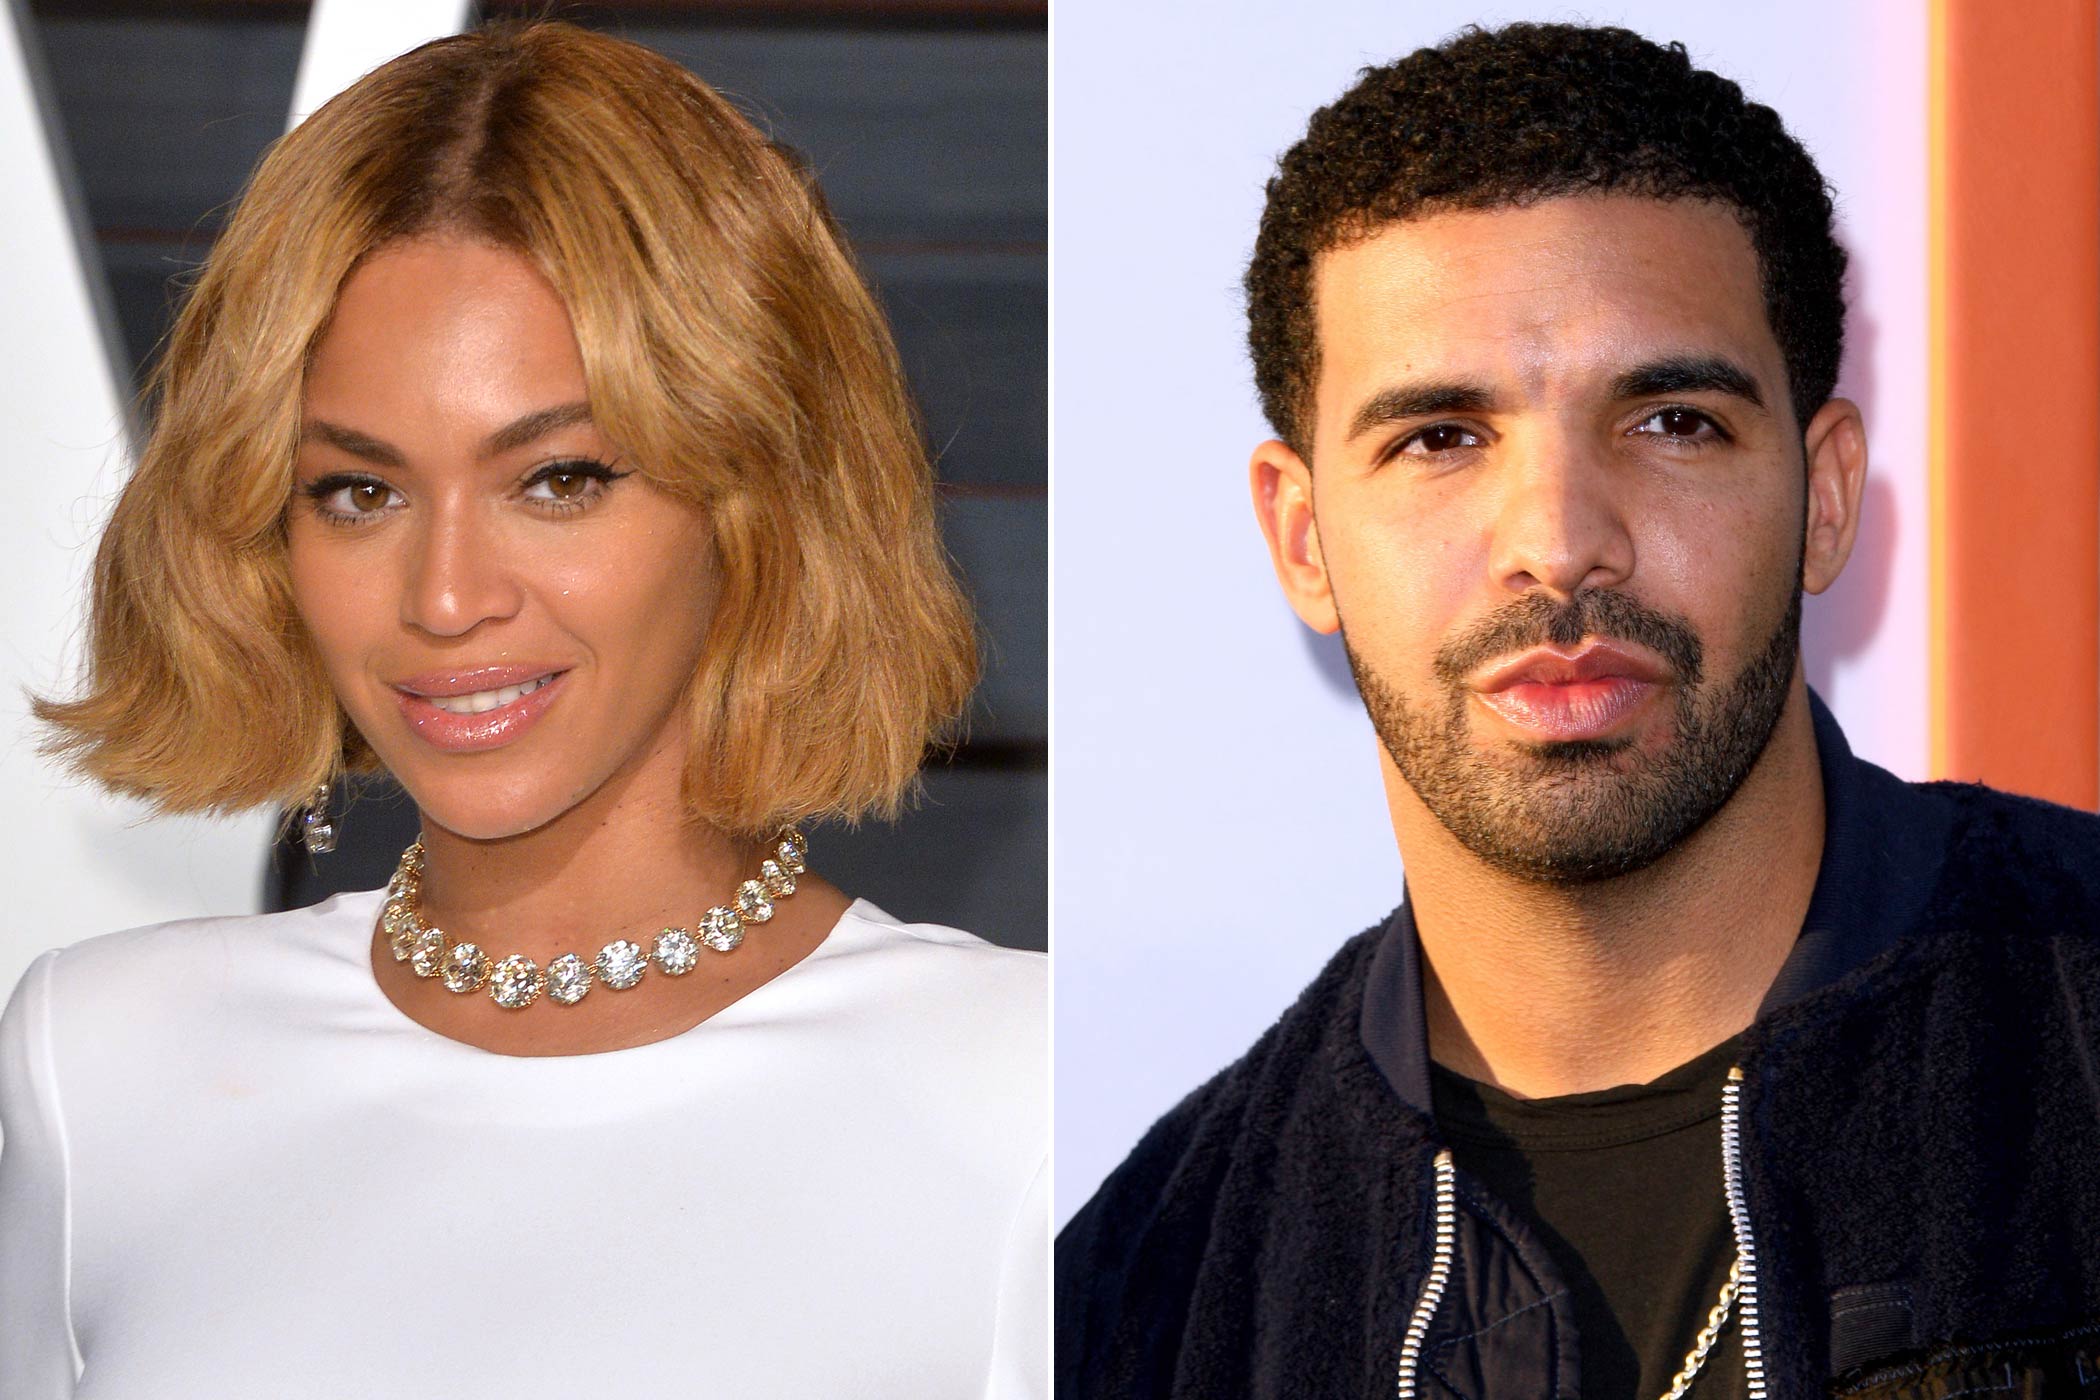 From left: Beyoncé and Drake (Getty Images (2))